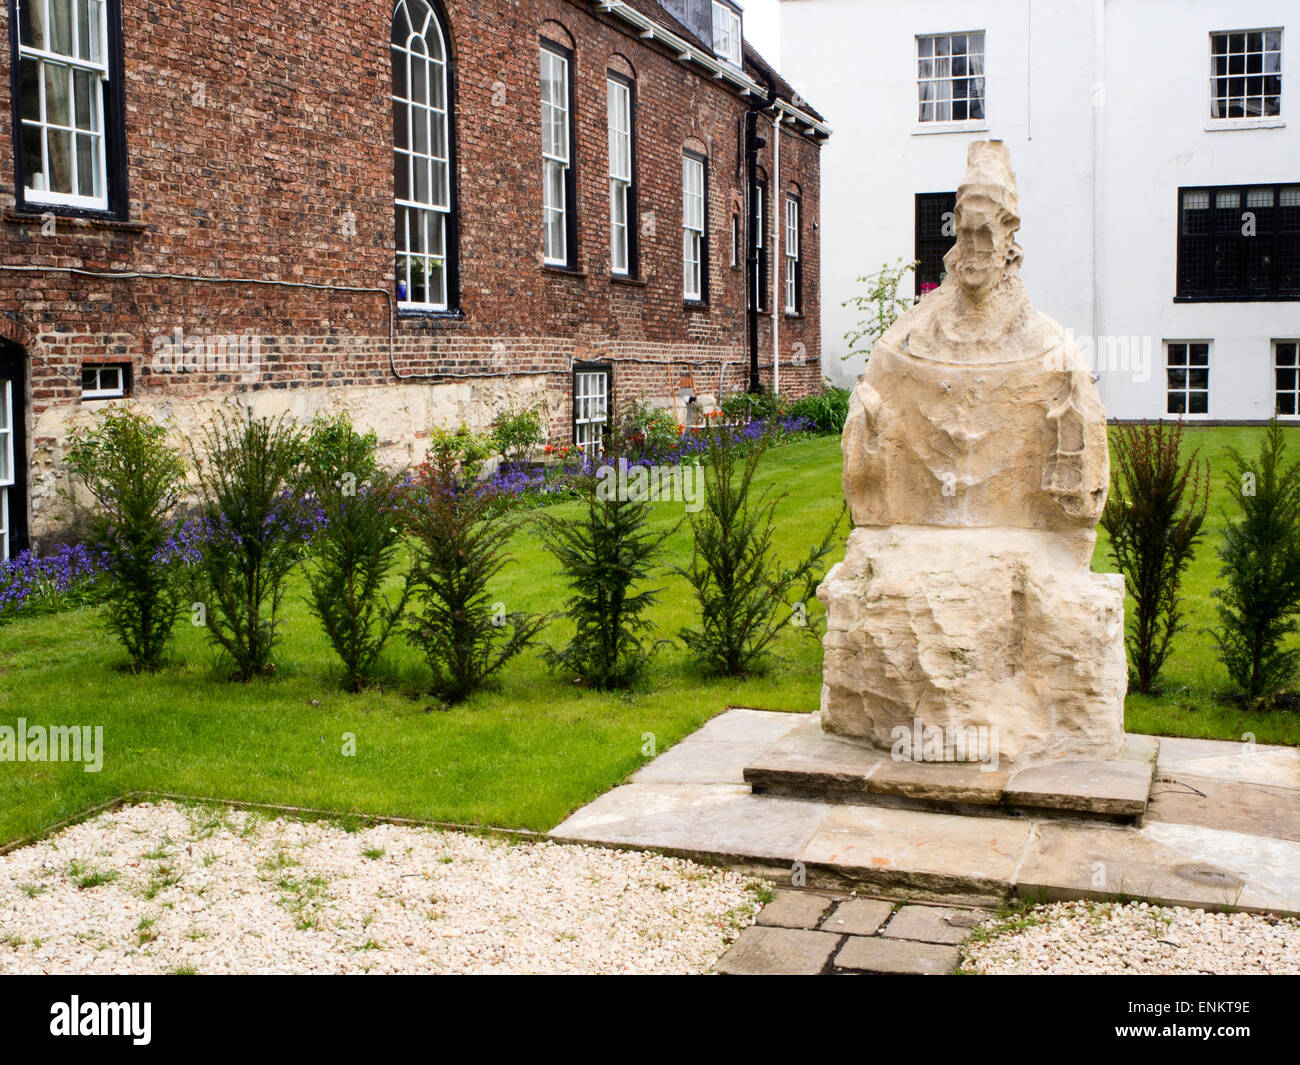 The Seated Figure Statue in a Garden on Minster Yard York Yorkshire England Believed to be St Peter and formerly at the apex of Stock Photo